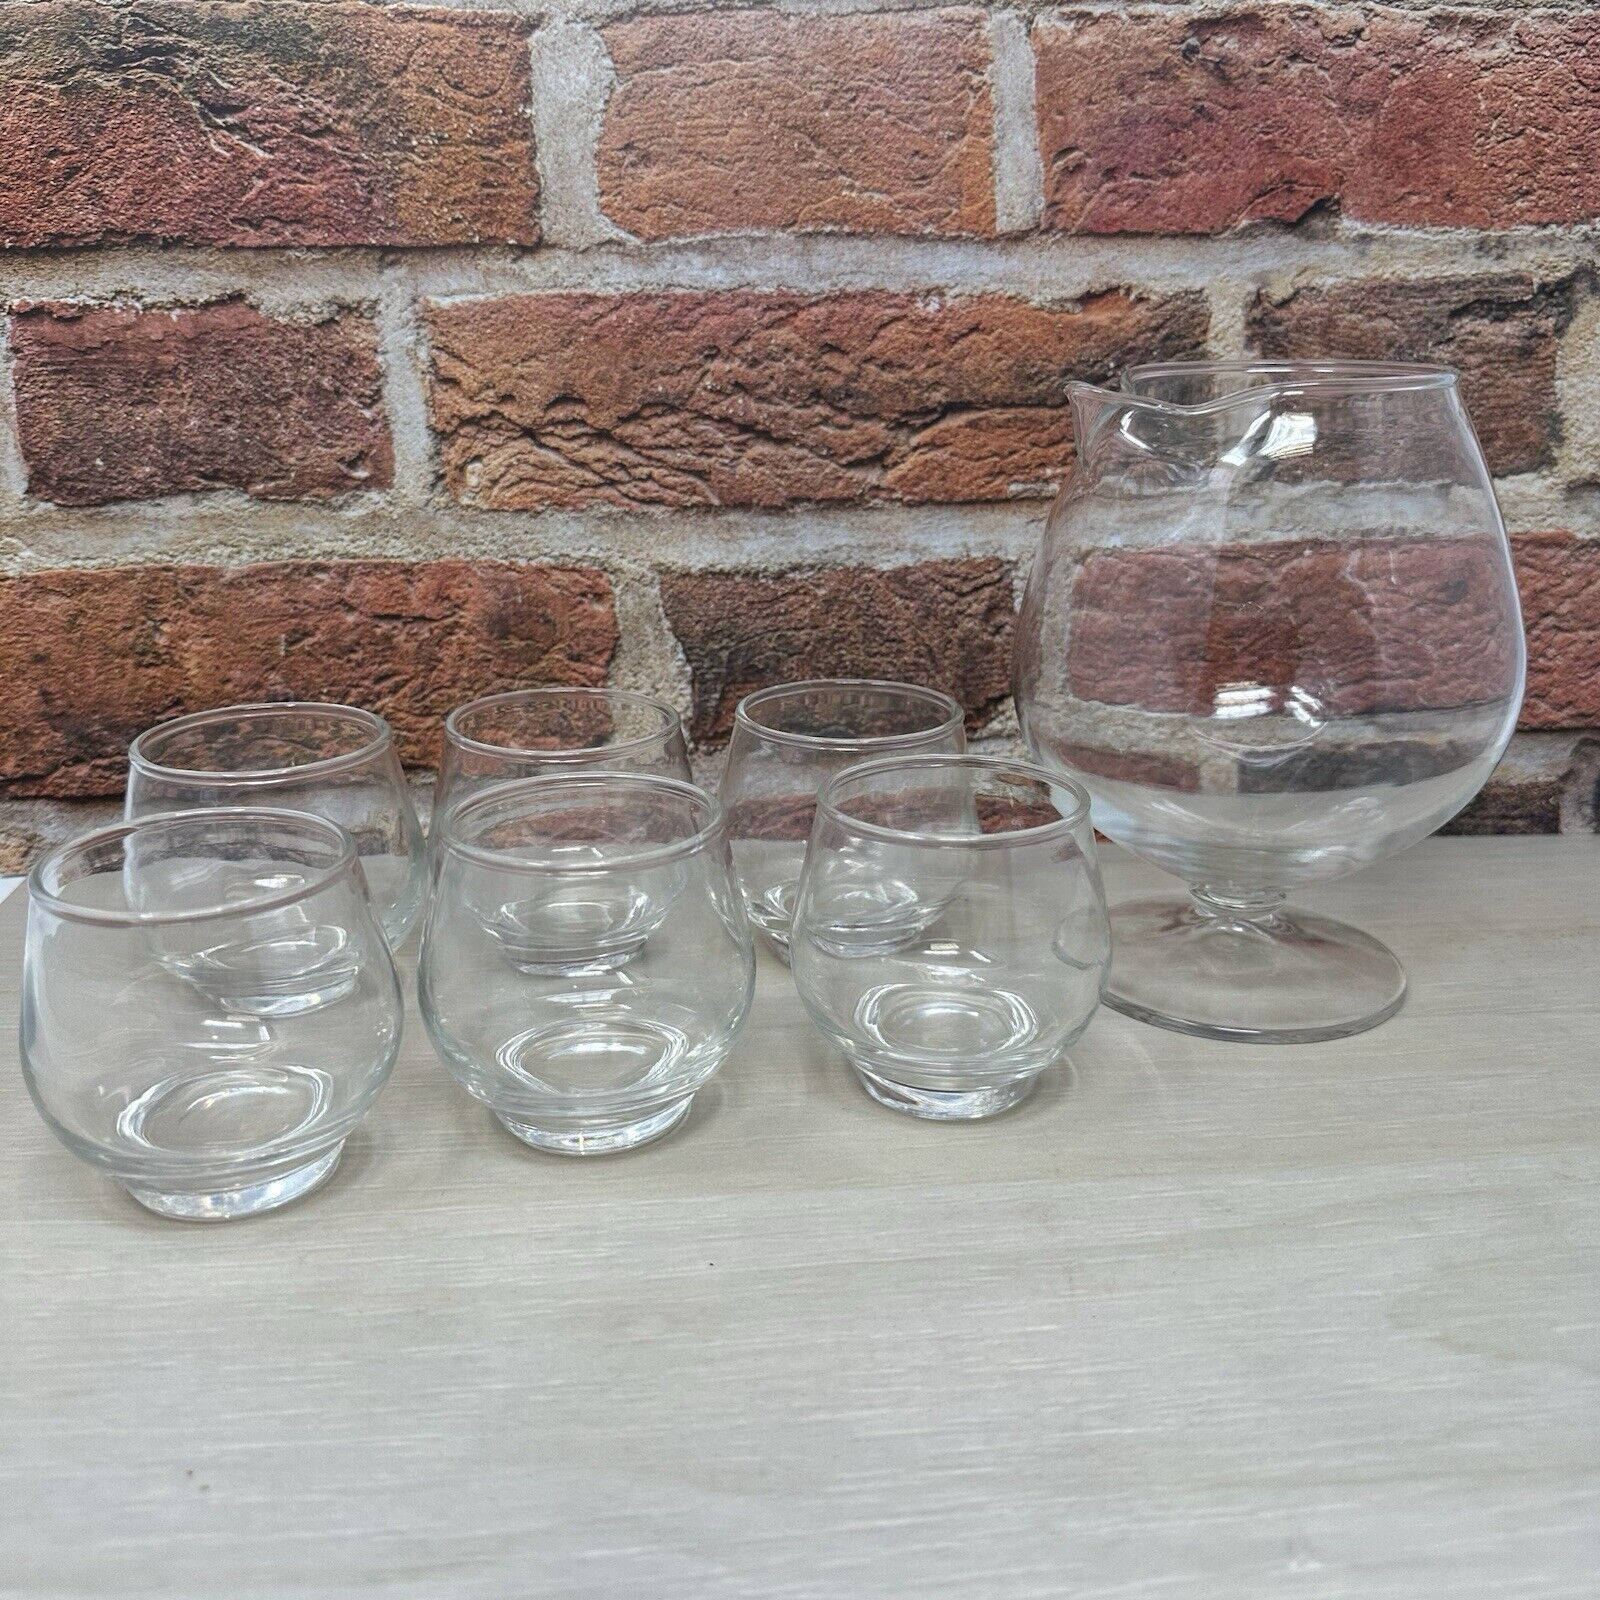 Vintage Trico Set of 6 Small Glasses and Our Spout Brandy Snifters